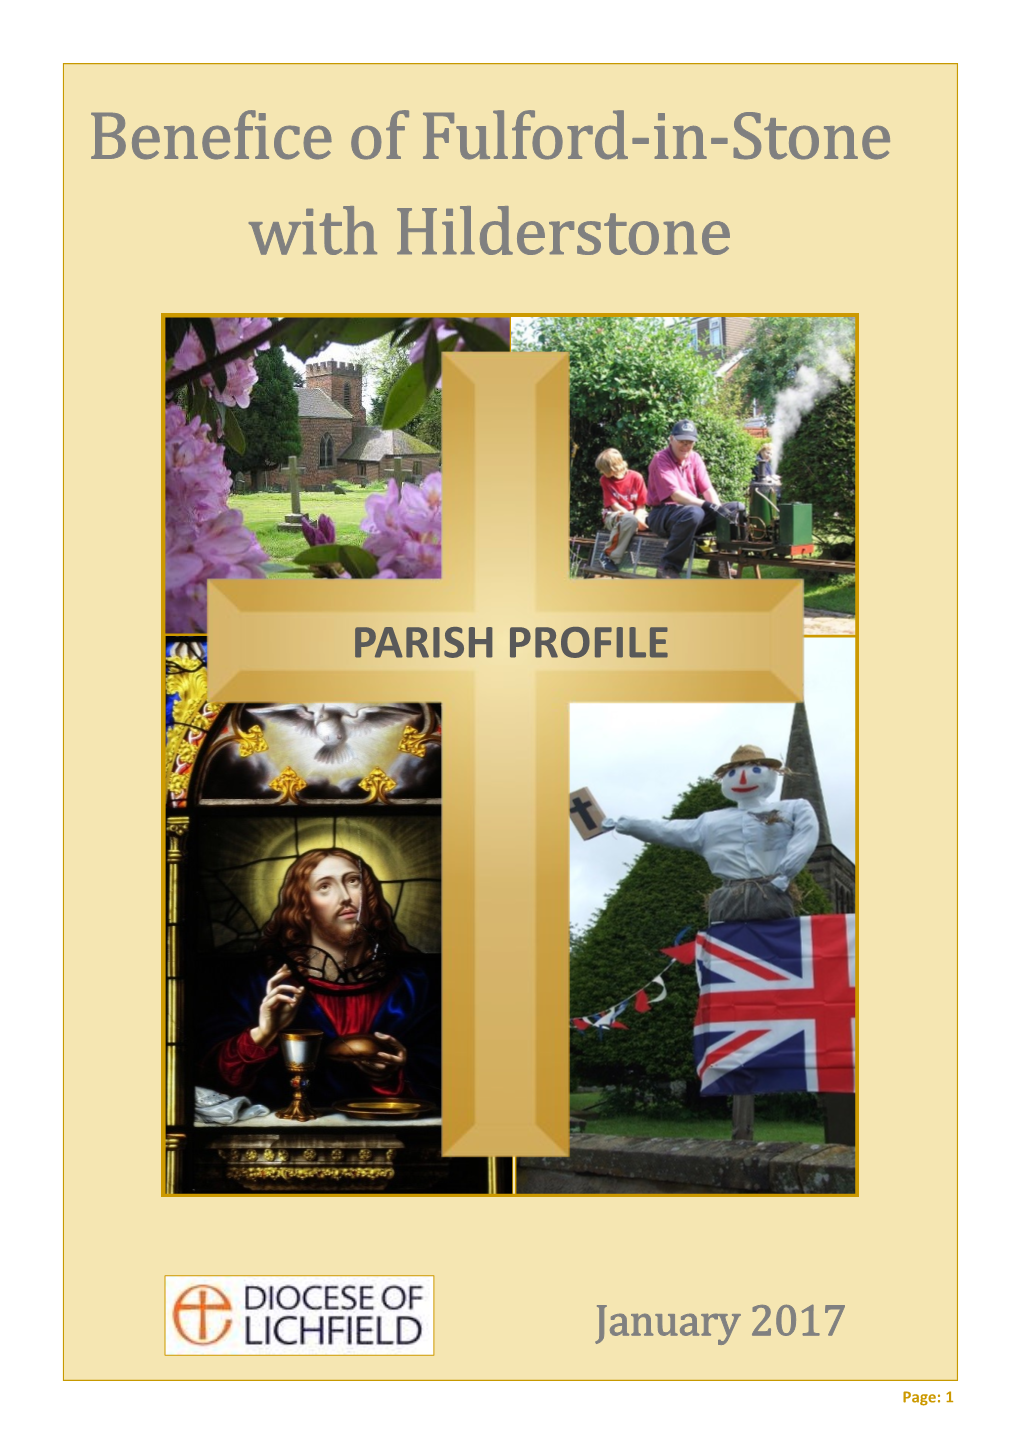 Benefice of Fulford-In-Stone with Hilderstone